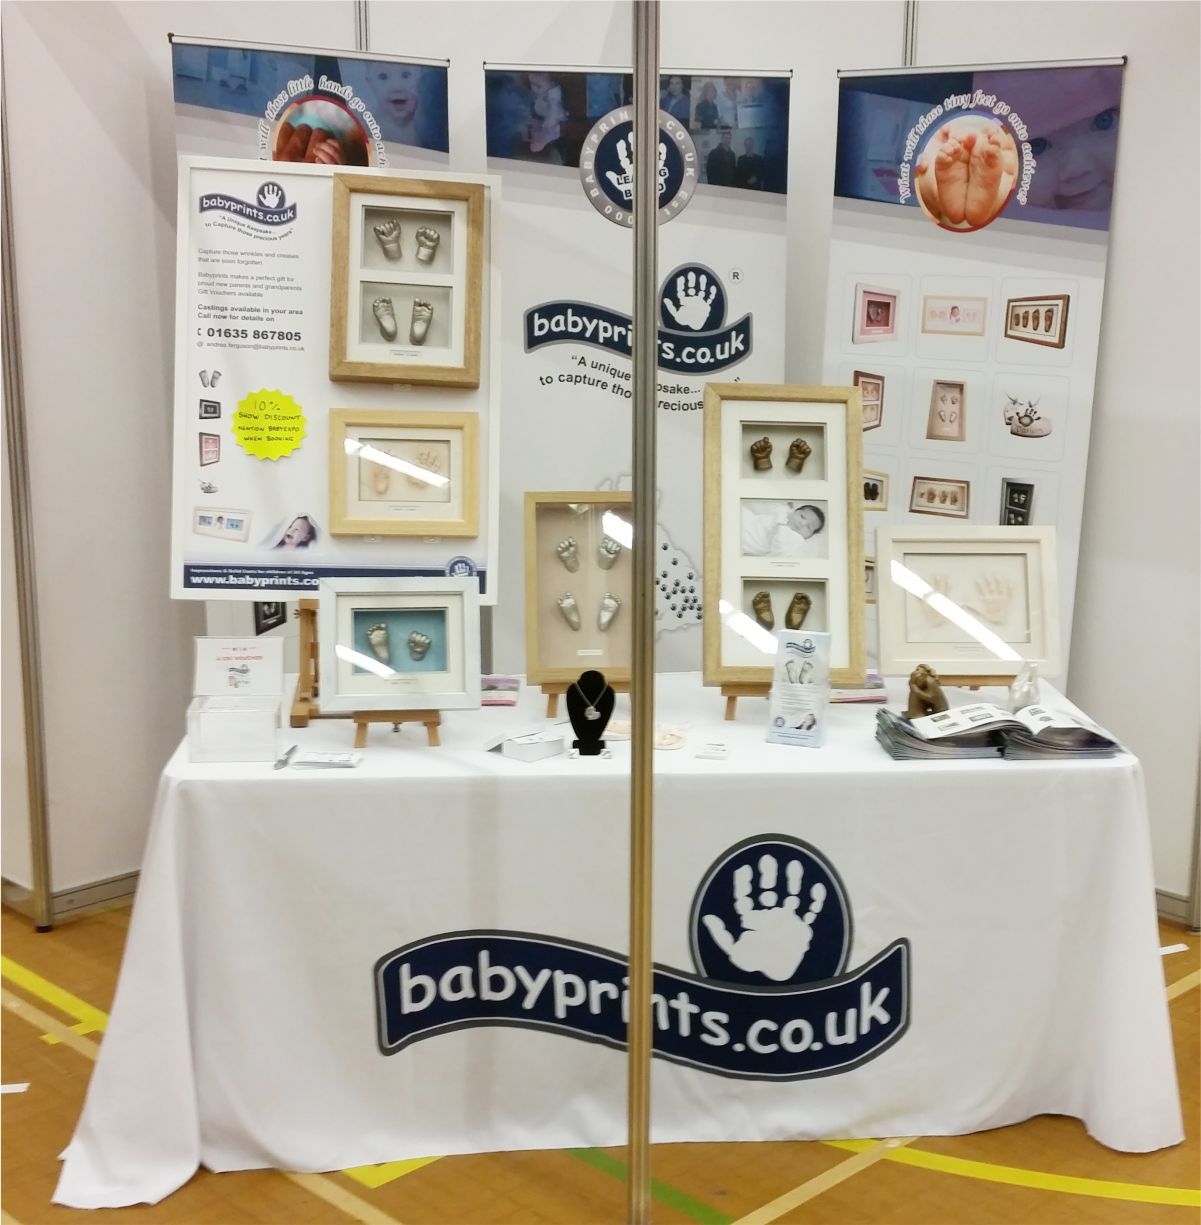 Babyprints at the Baby Expo in Reading